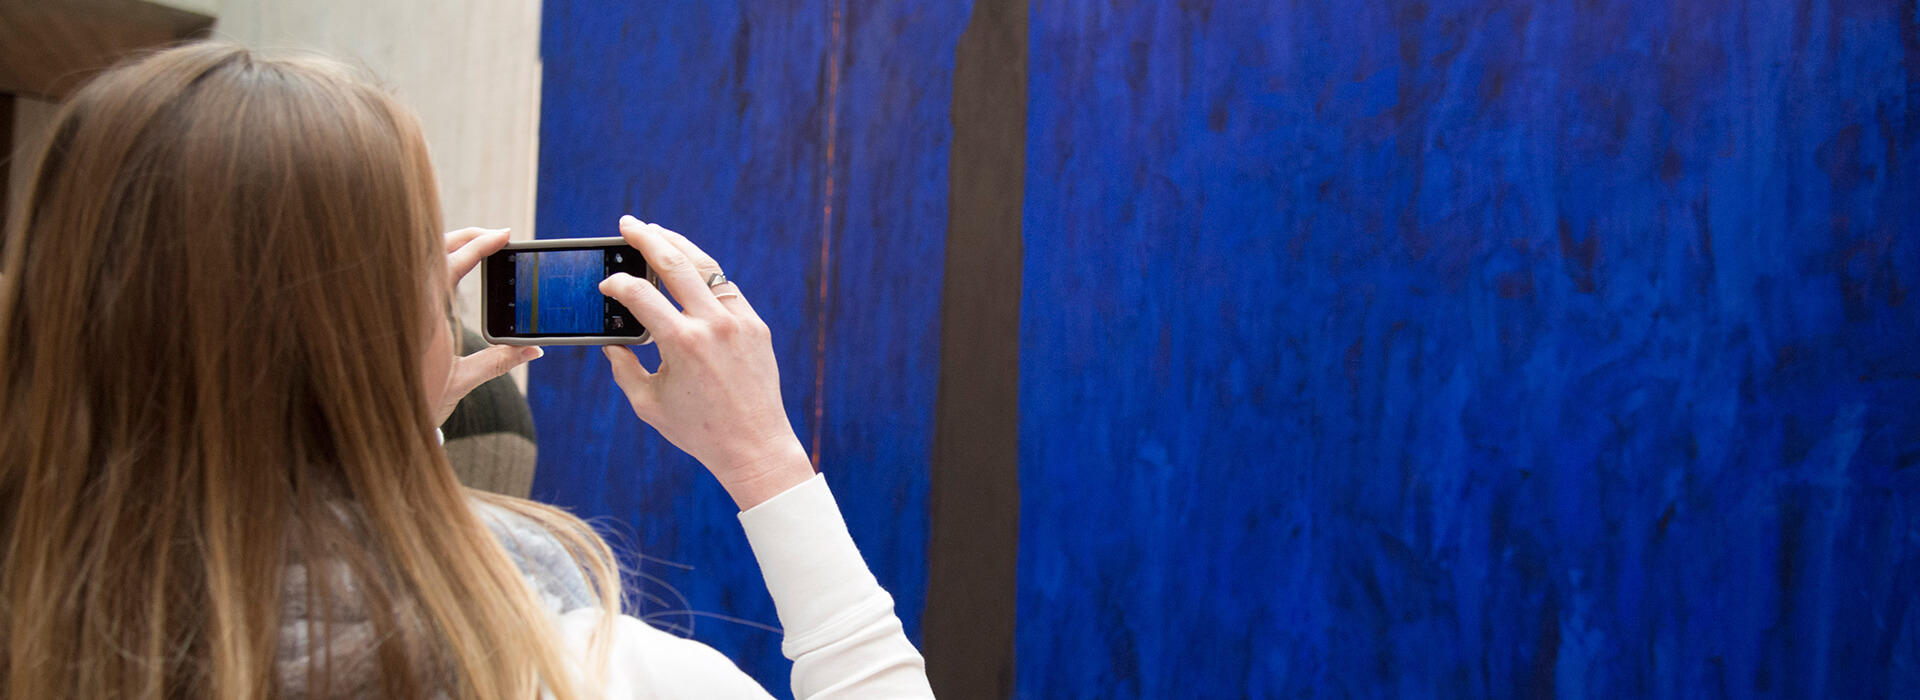 Woman takes a photo of a large blue painting with her phone